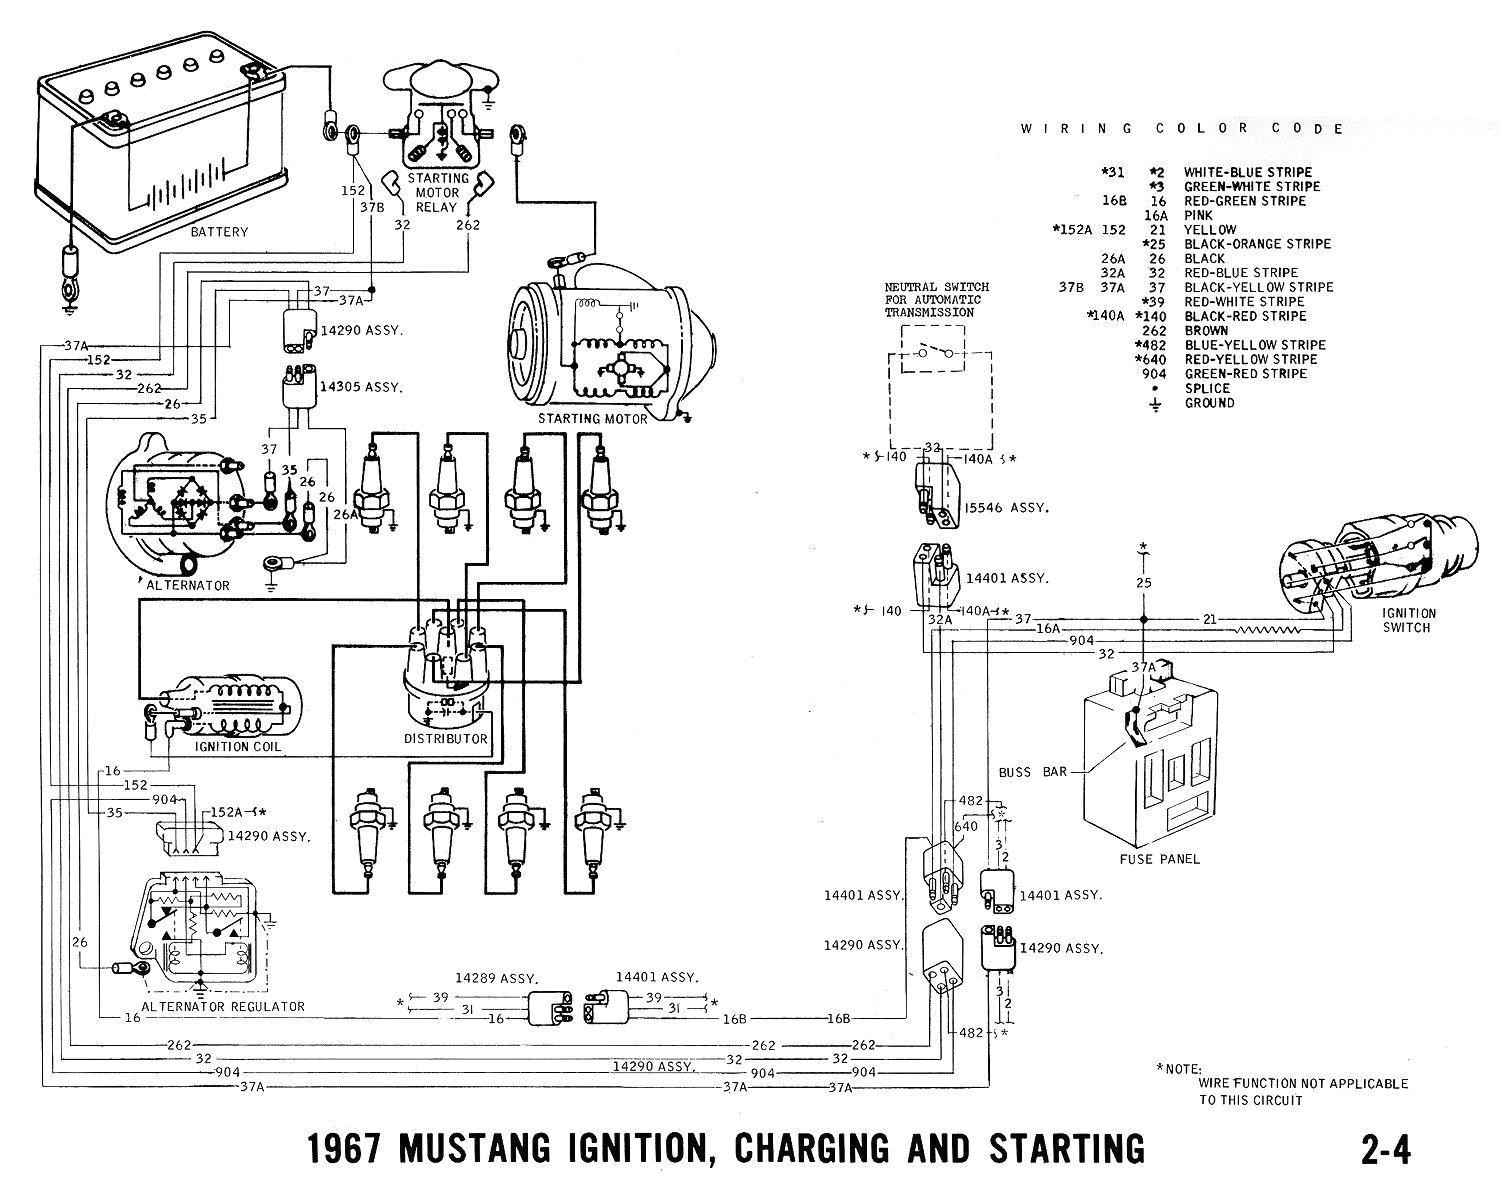 1965 mustang coil wiring for pinterest wiring diagram world